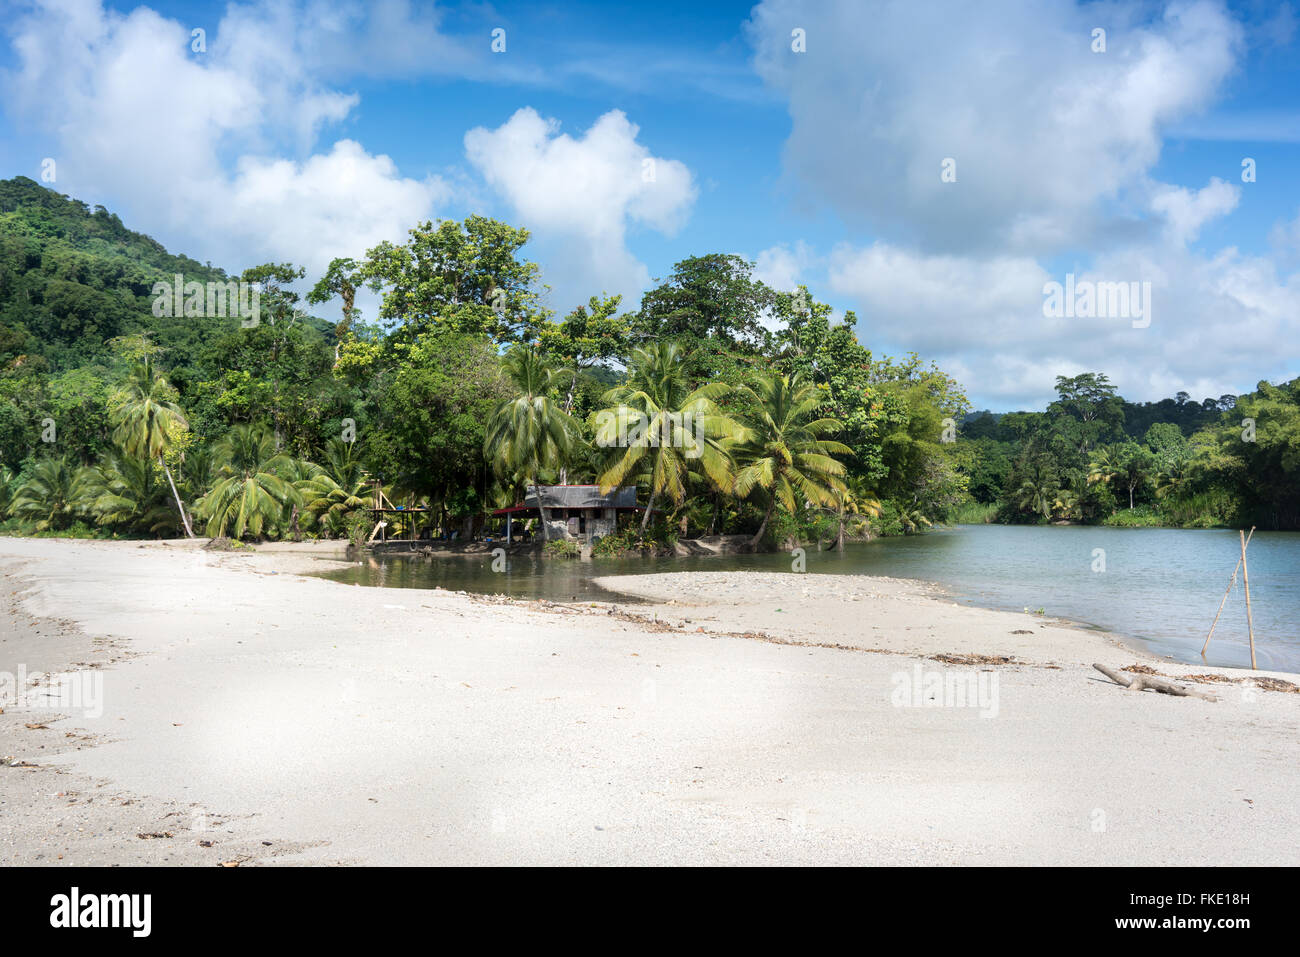 Scenic view of exotic beach with palm trees and low tide against cloudy sky, Trinidad, Trinidad and Tobago Stock Photo